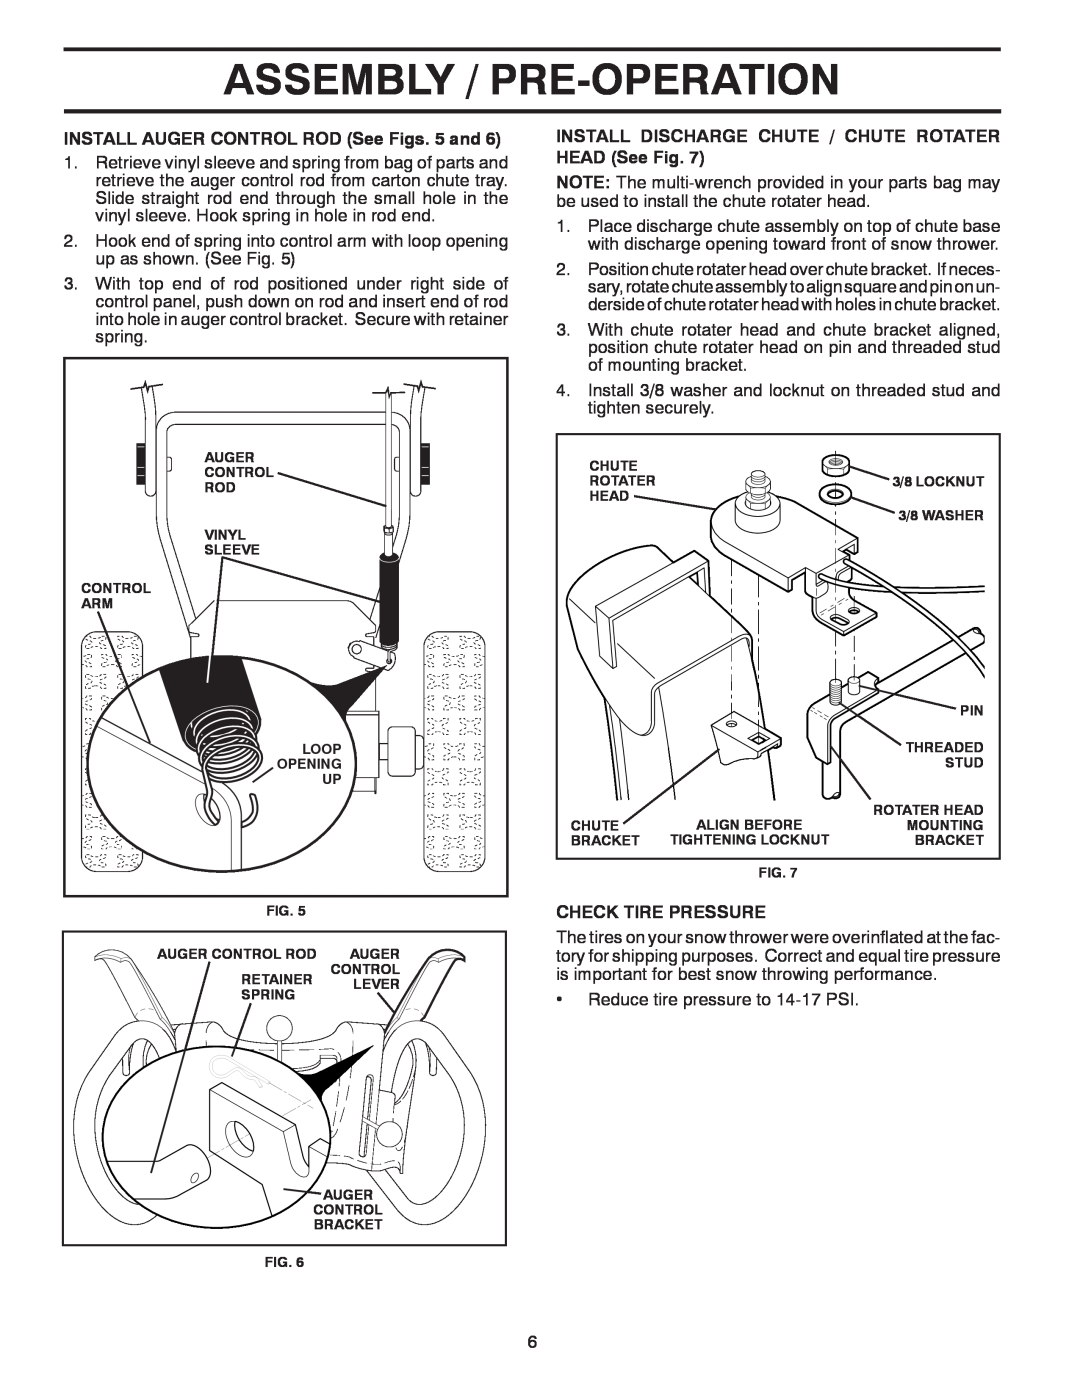 Poulan 435562, 96198002603 Assembly / Pre-Operation, INSTALL AUGER CONTROL ROD See Figs. 5 and, Check Tire Pressure 